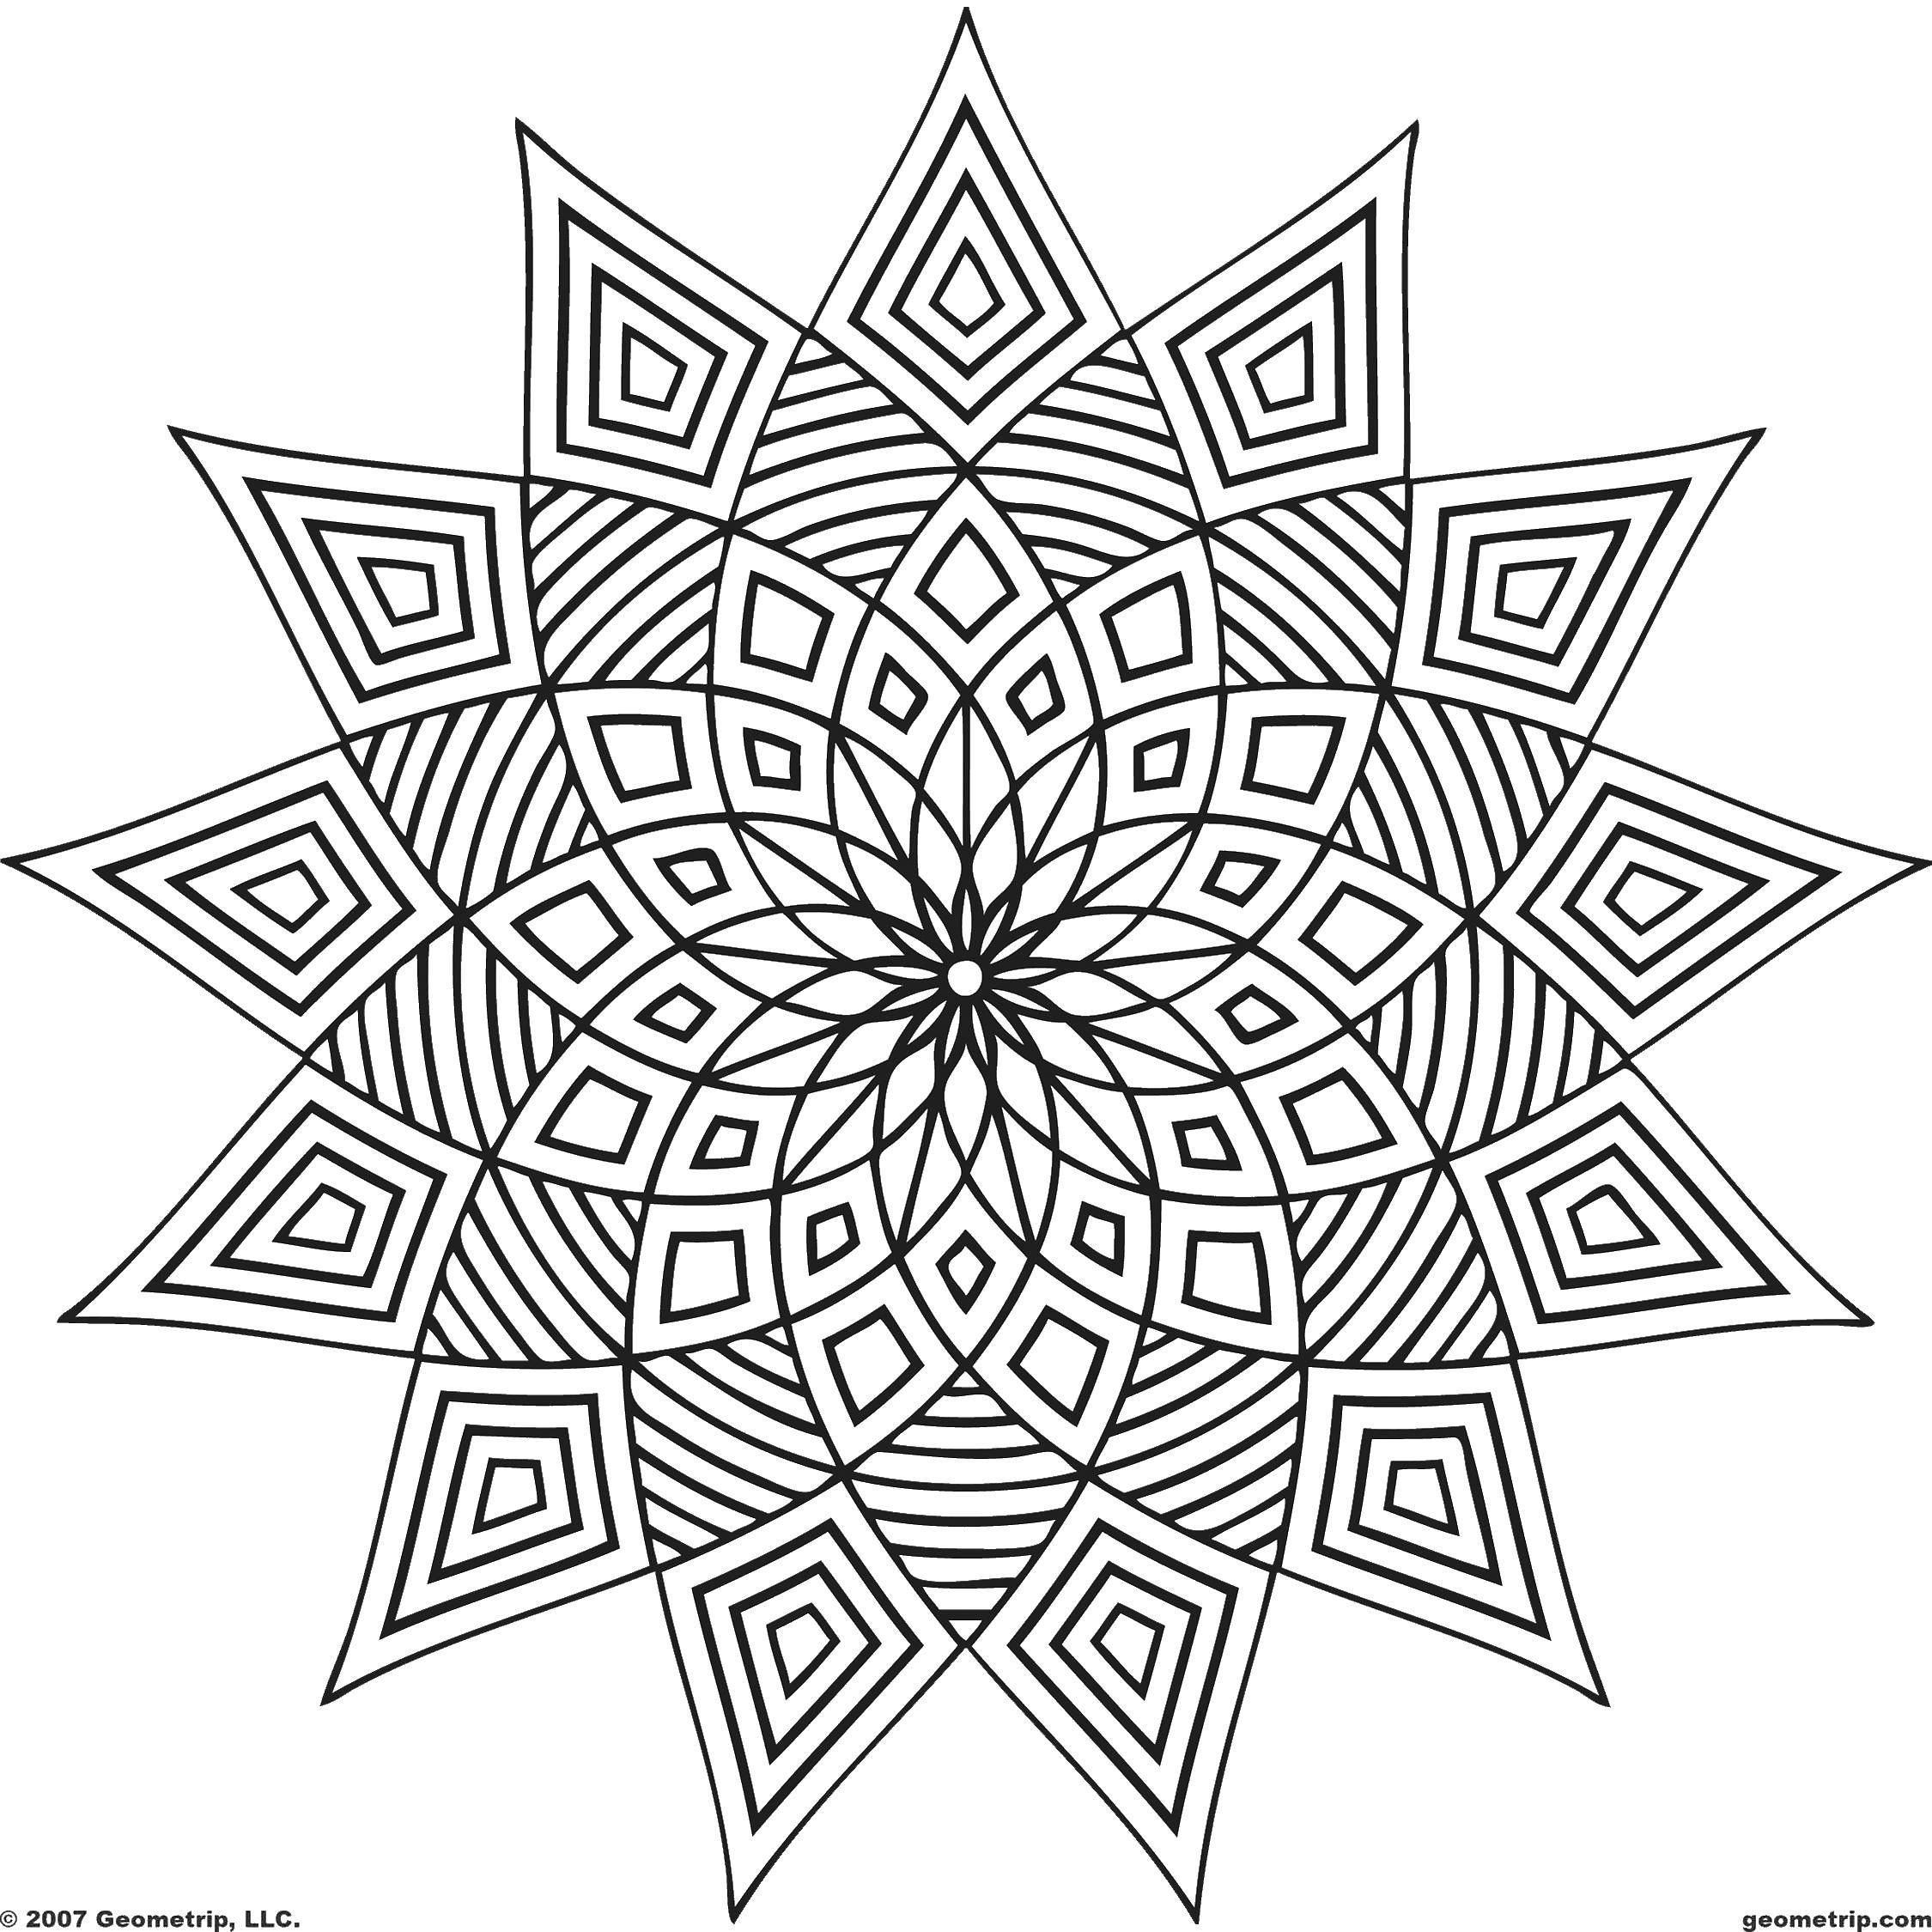 Coloring A flower made of lines and shapes. Category patterns. Tags:  patterns, flower, line.